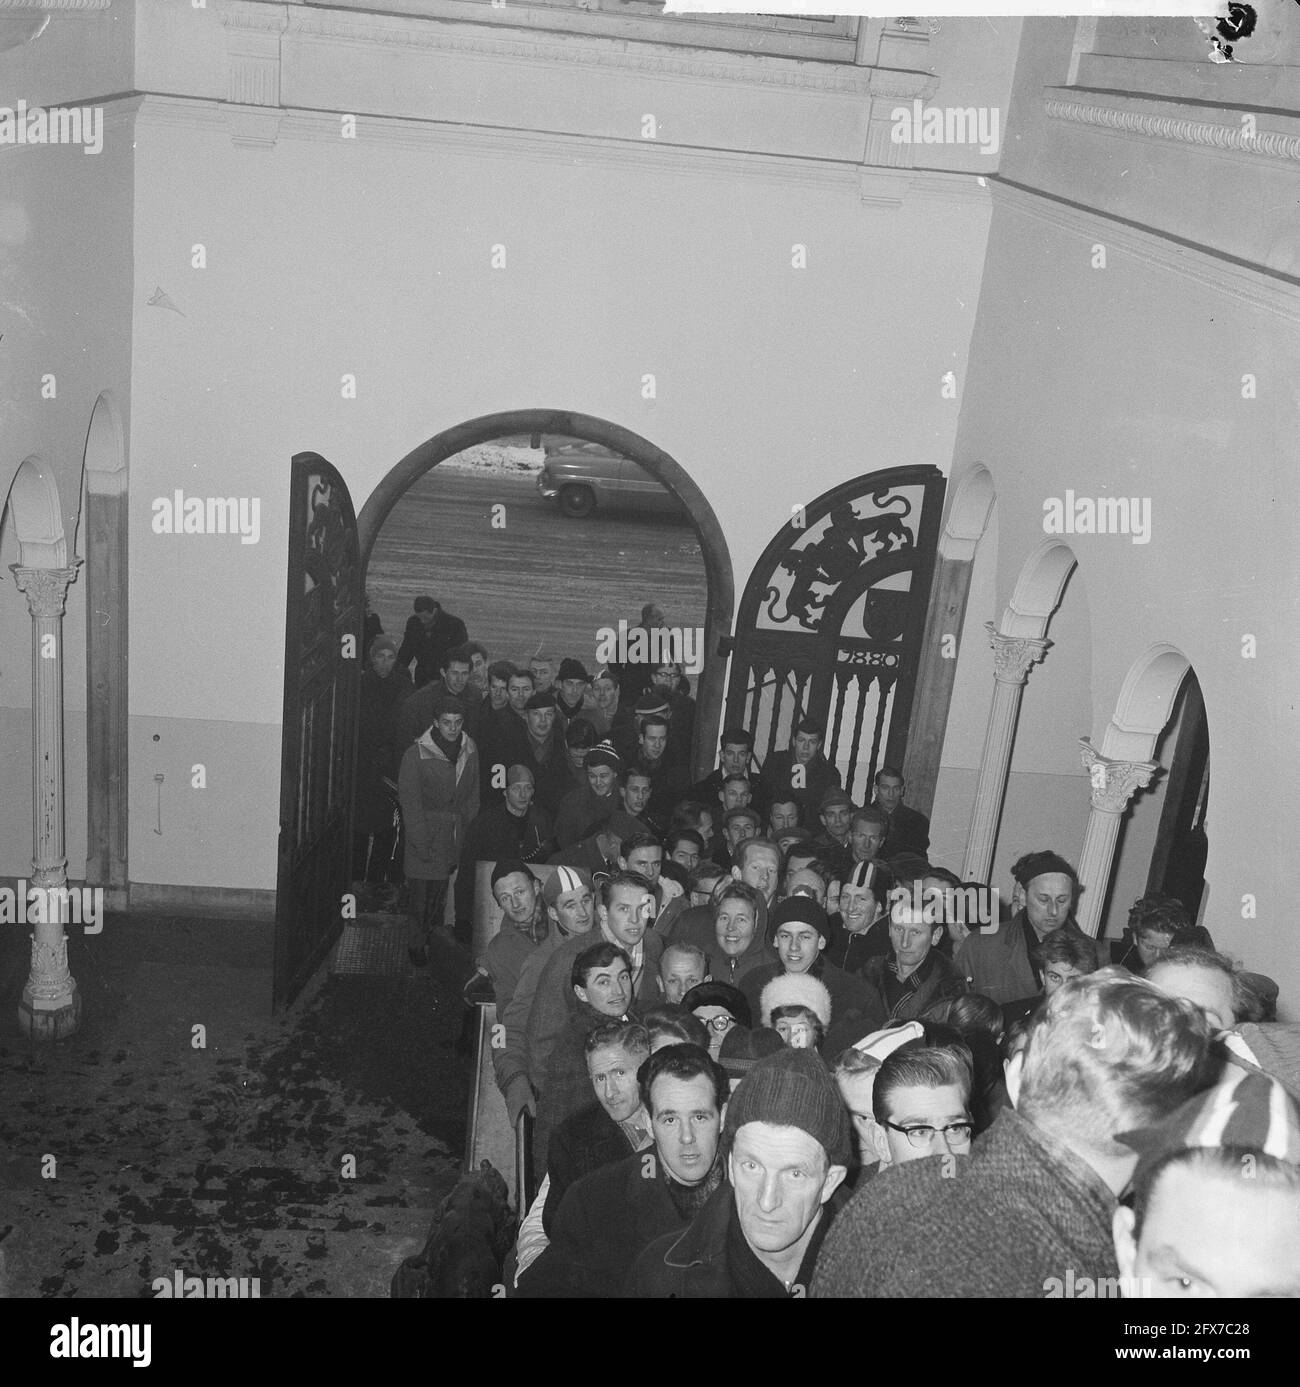 Entries for the Elfstedentocht in the Leeuwarden Stock Exchange building, 17 January 1963, participants, skating, sports, The Netherlands, 20th century press agency photo, news to remember, documentary, historic photography 1945-1990, visual stories, human history of the Twentieth Century, capturing moments in time Stock Photo